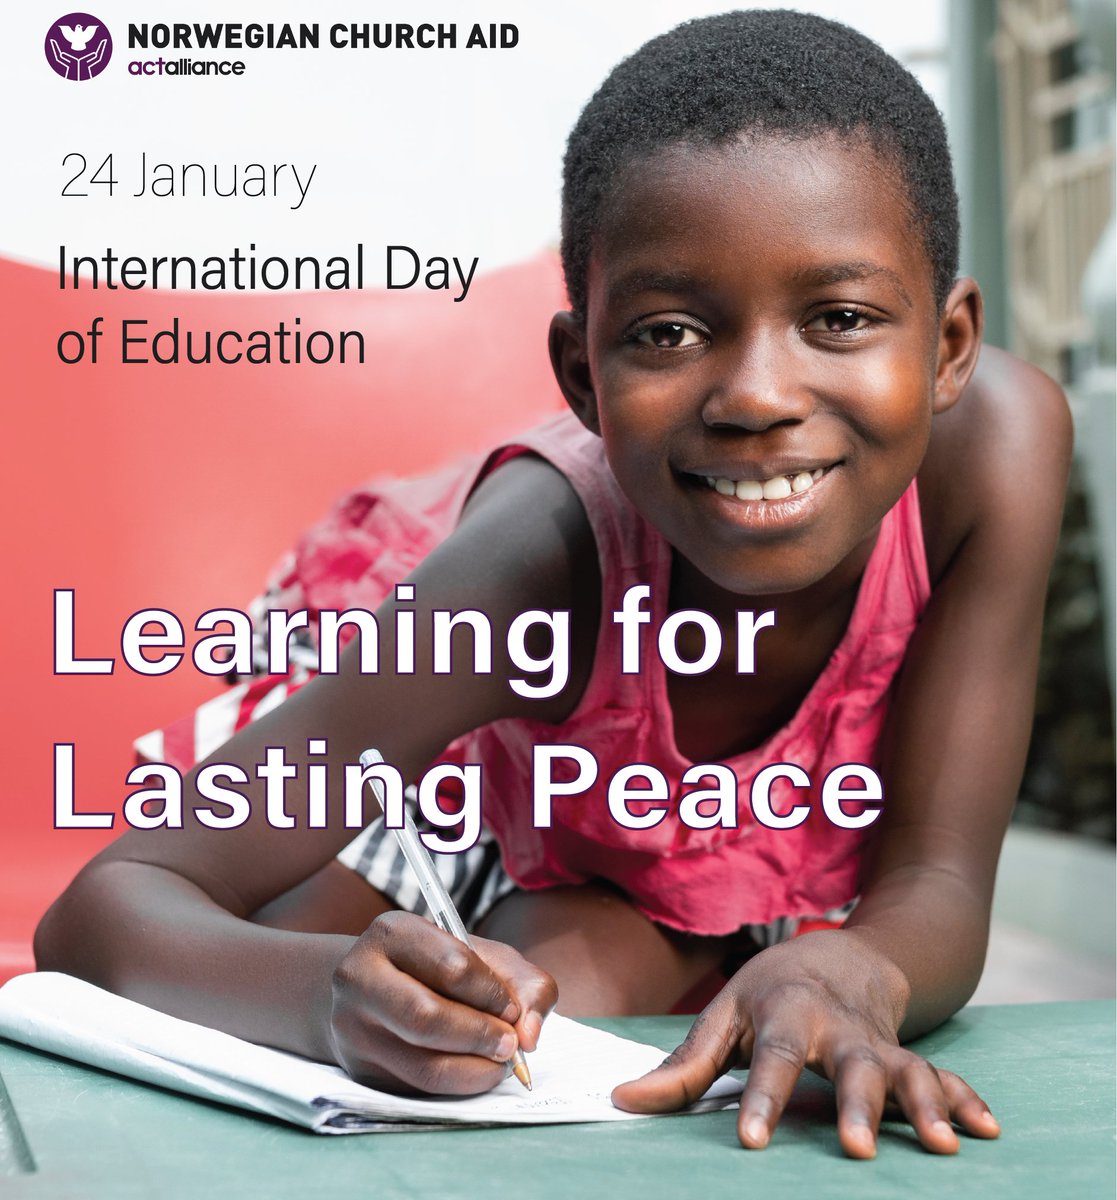 Education should be at the centre of our efforts to achieve and maintain #Peace because what we learn affects how we view the world and treat others. Happy #InternationalEducationDay